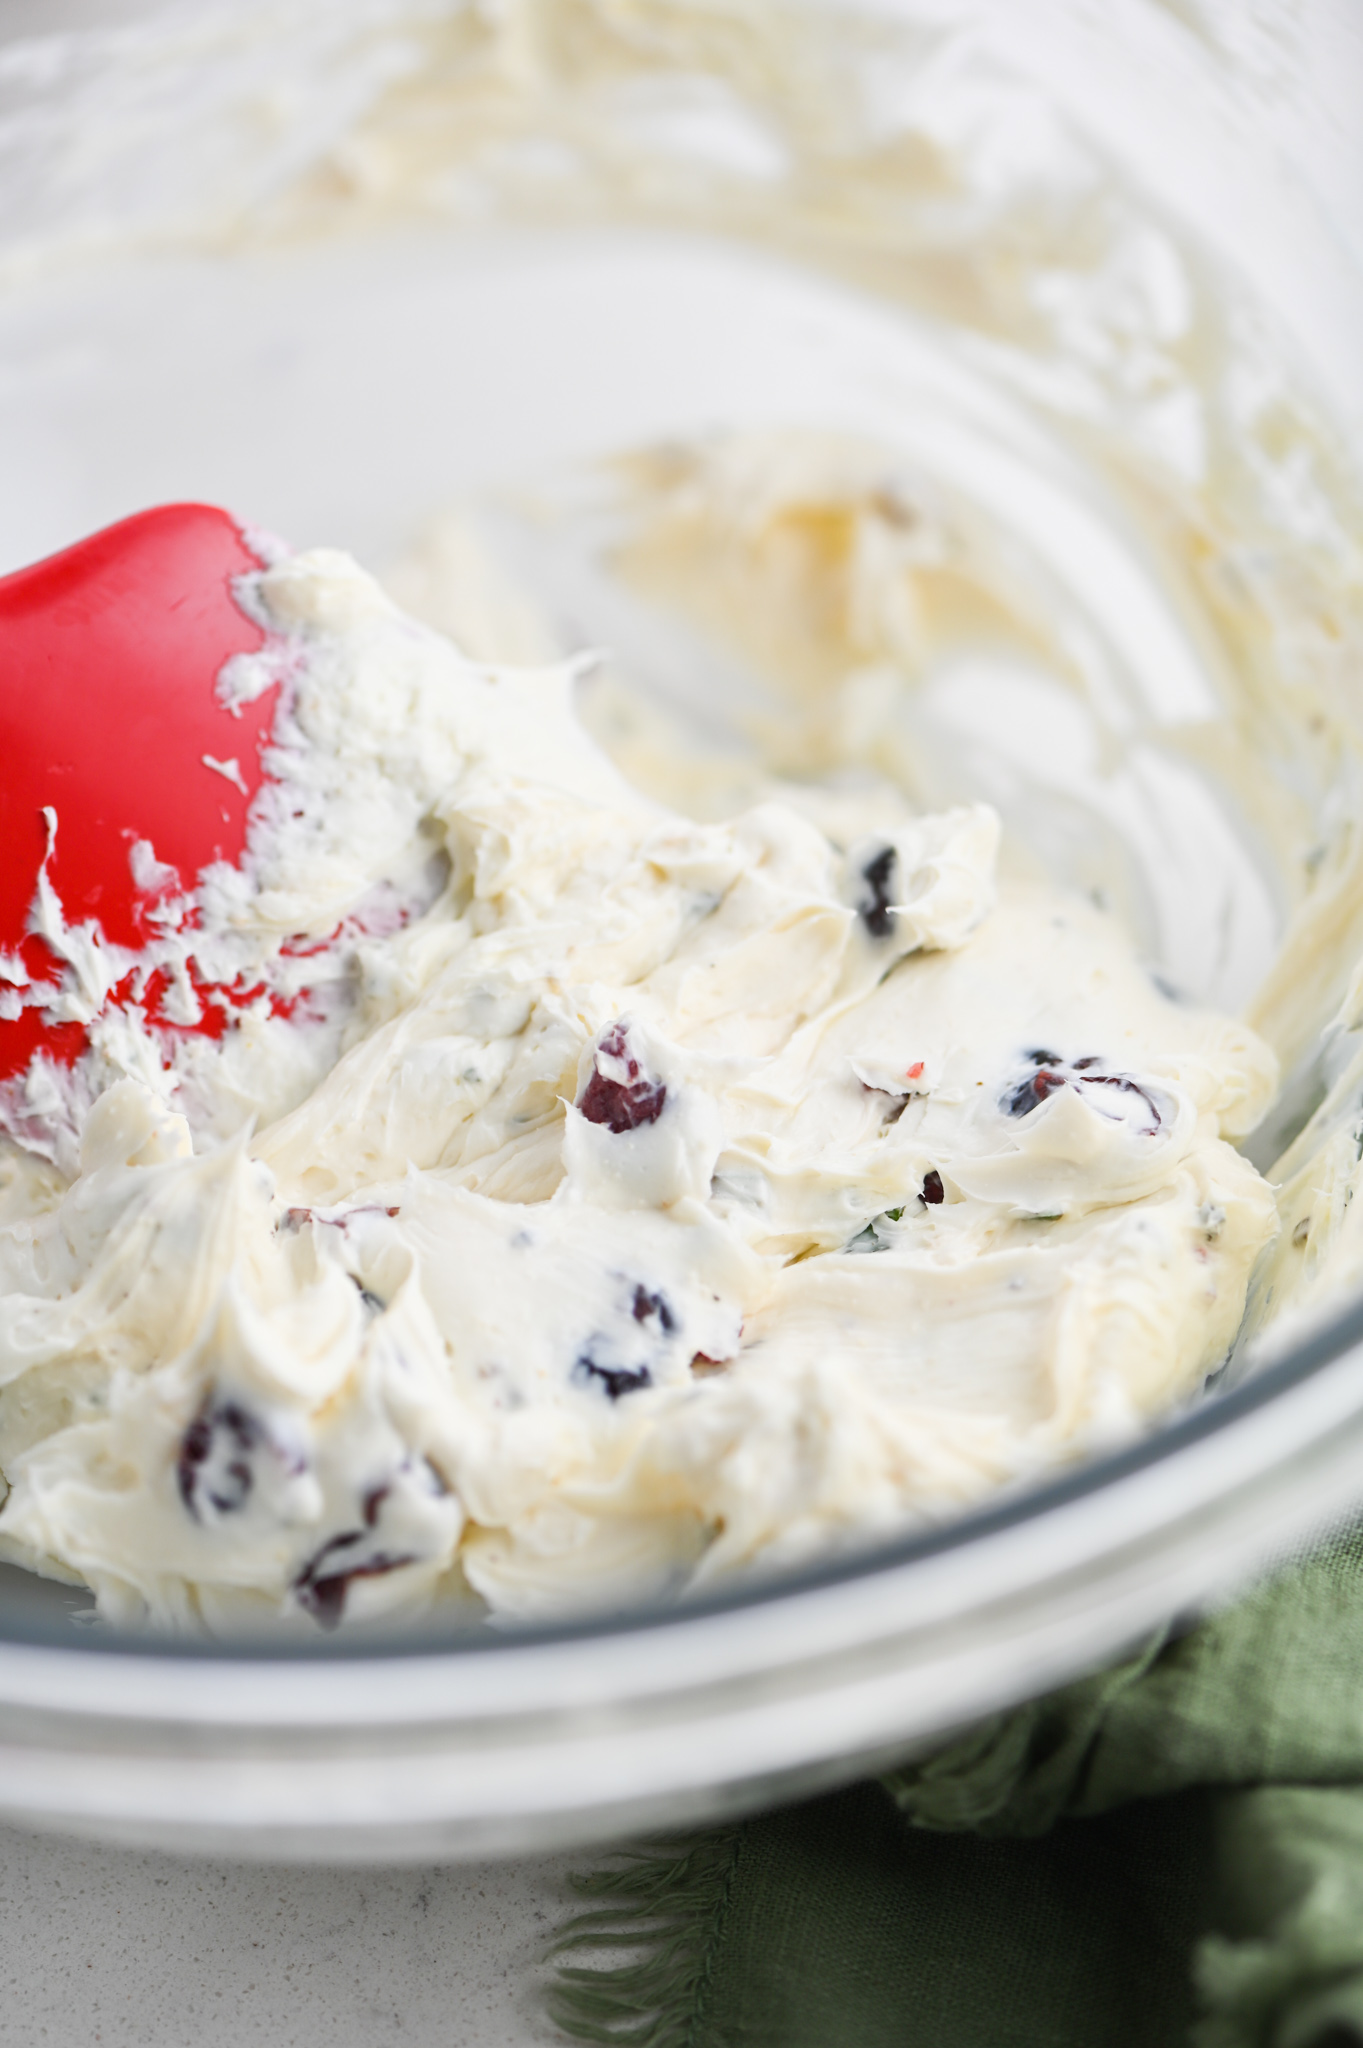 Mixing cranberry cream cheese in a glass bowl.